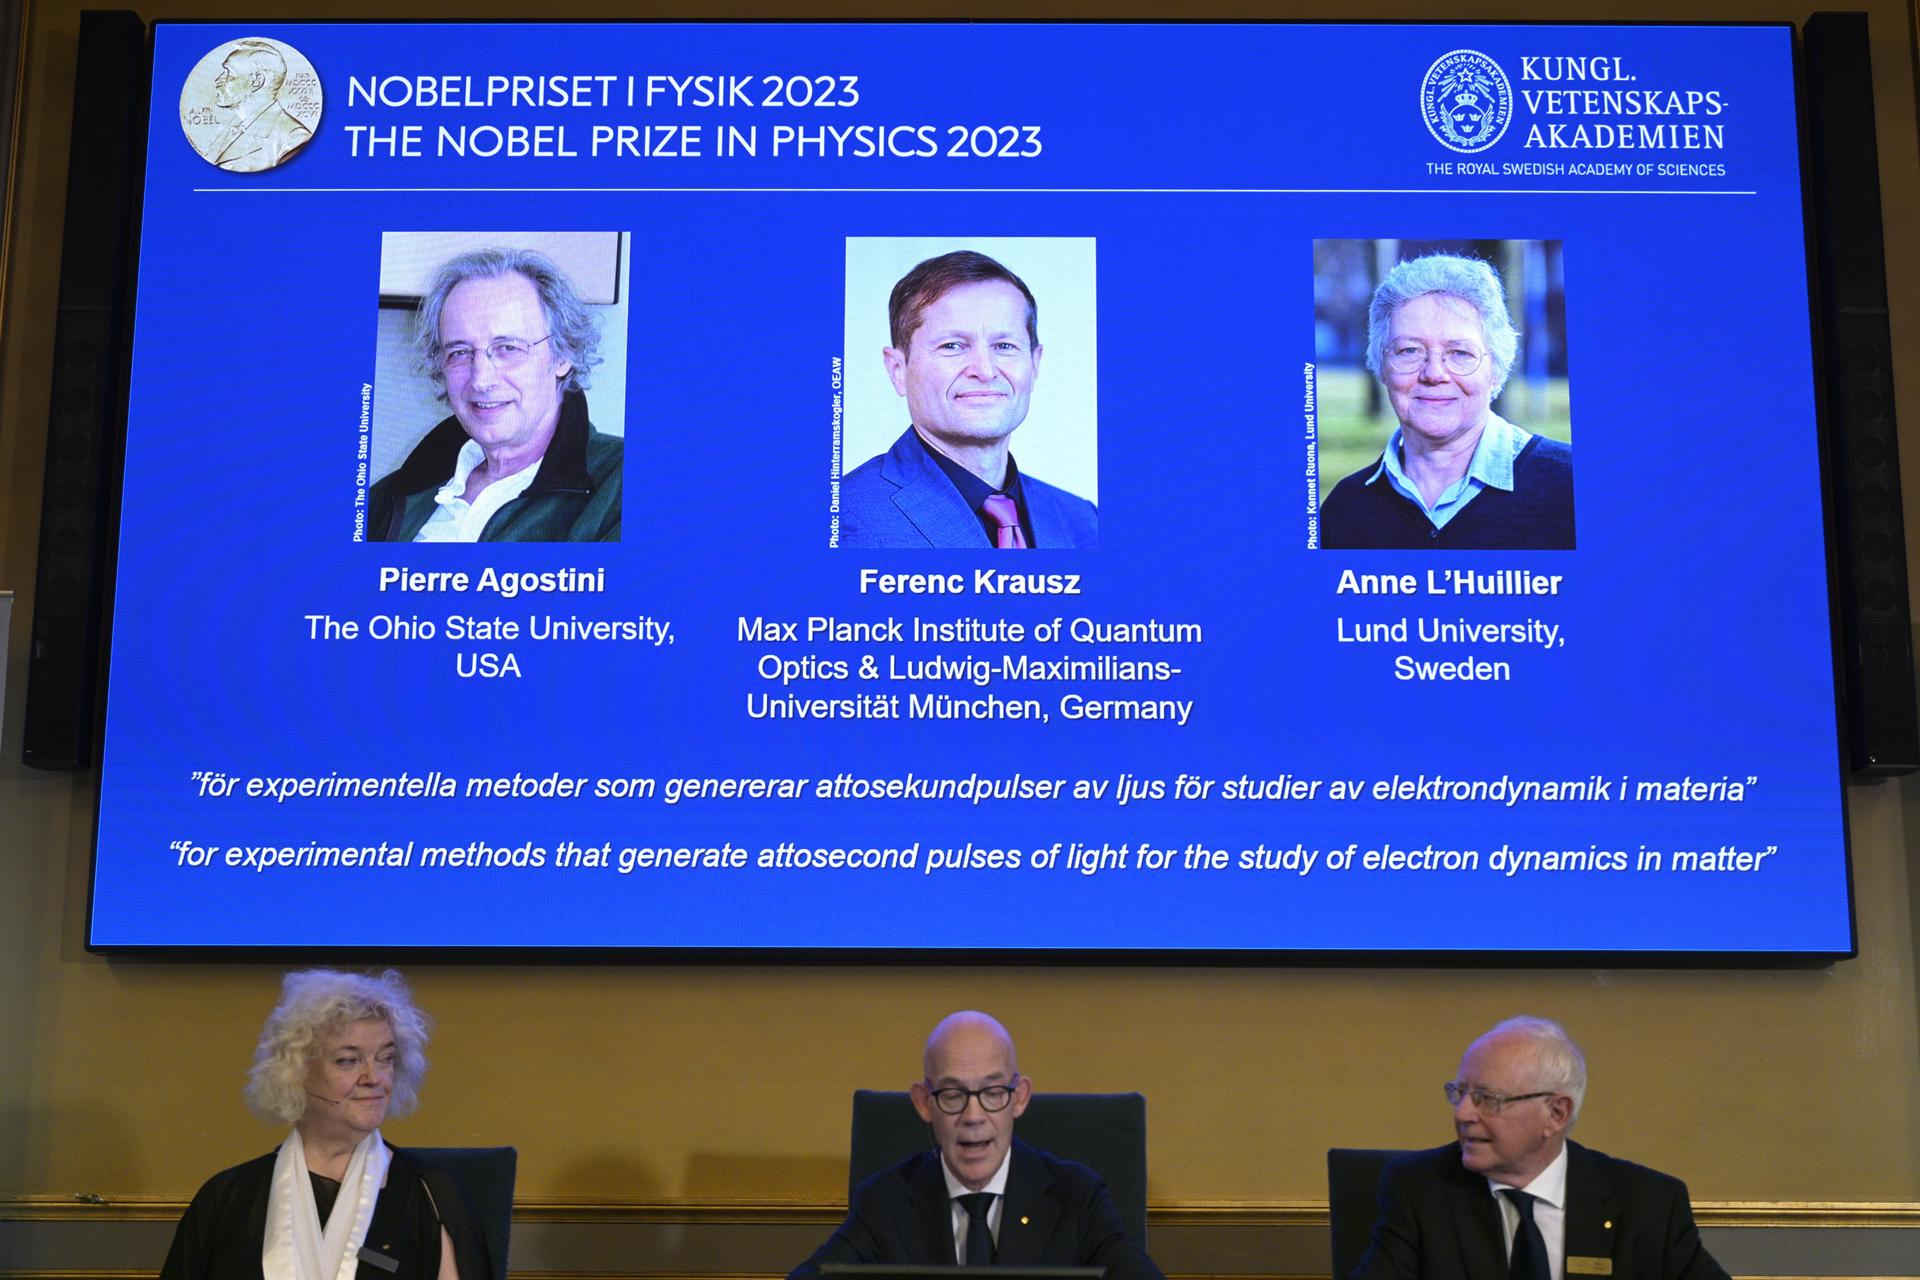 Nobel Prize in Physics for Agostini, Krausz and L’Huillier for their experiments with attoseconds